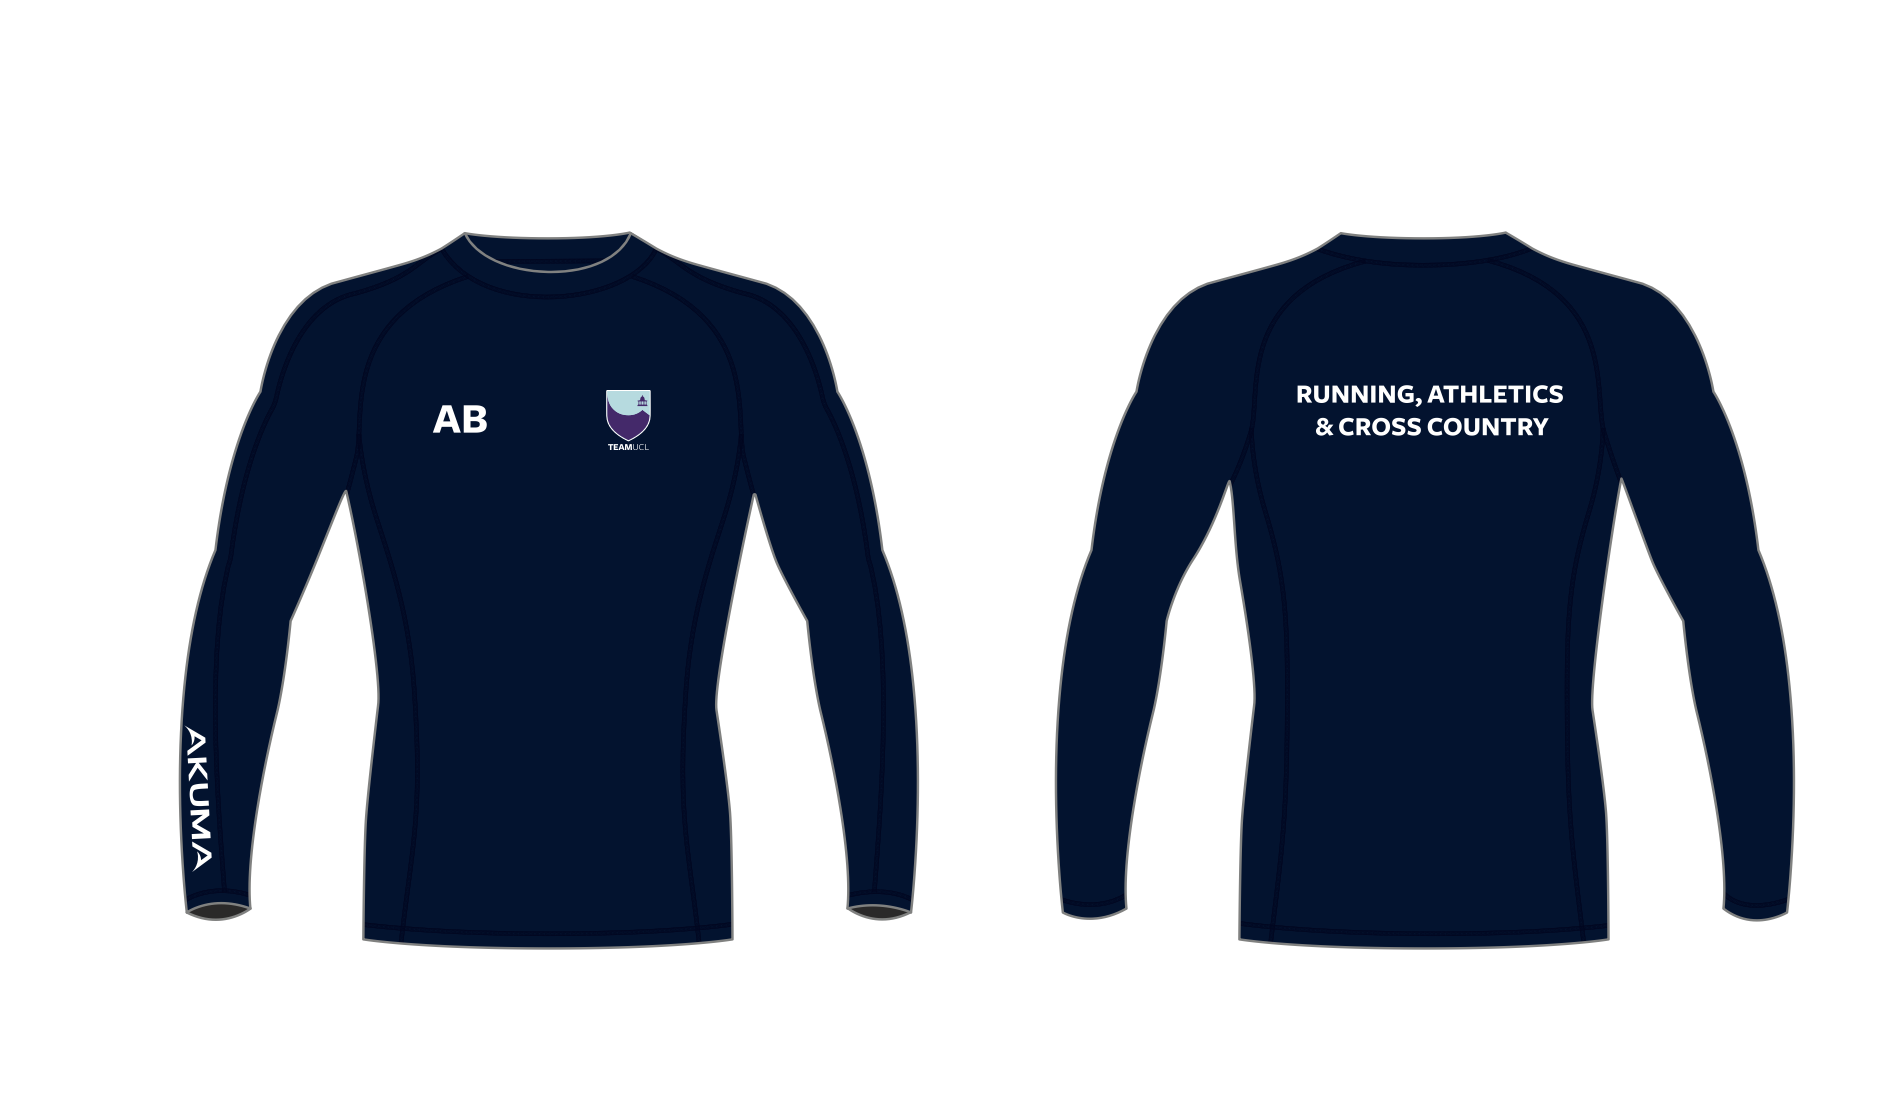 Navy blue base layer top